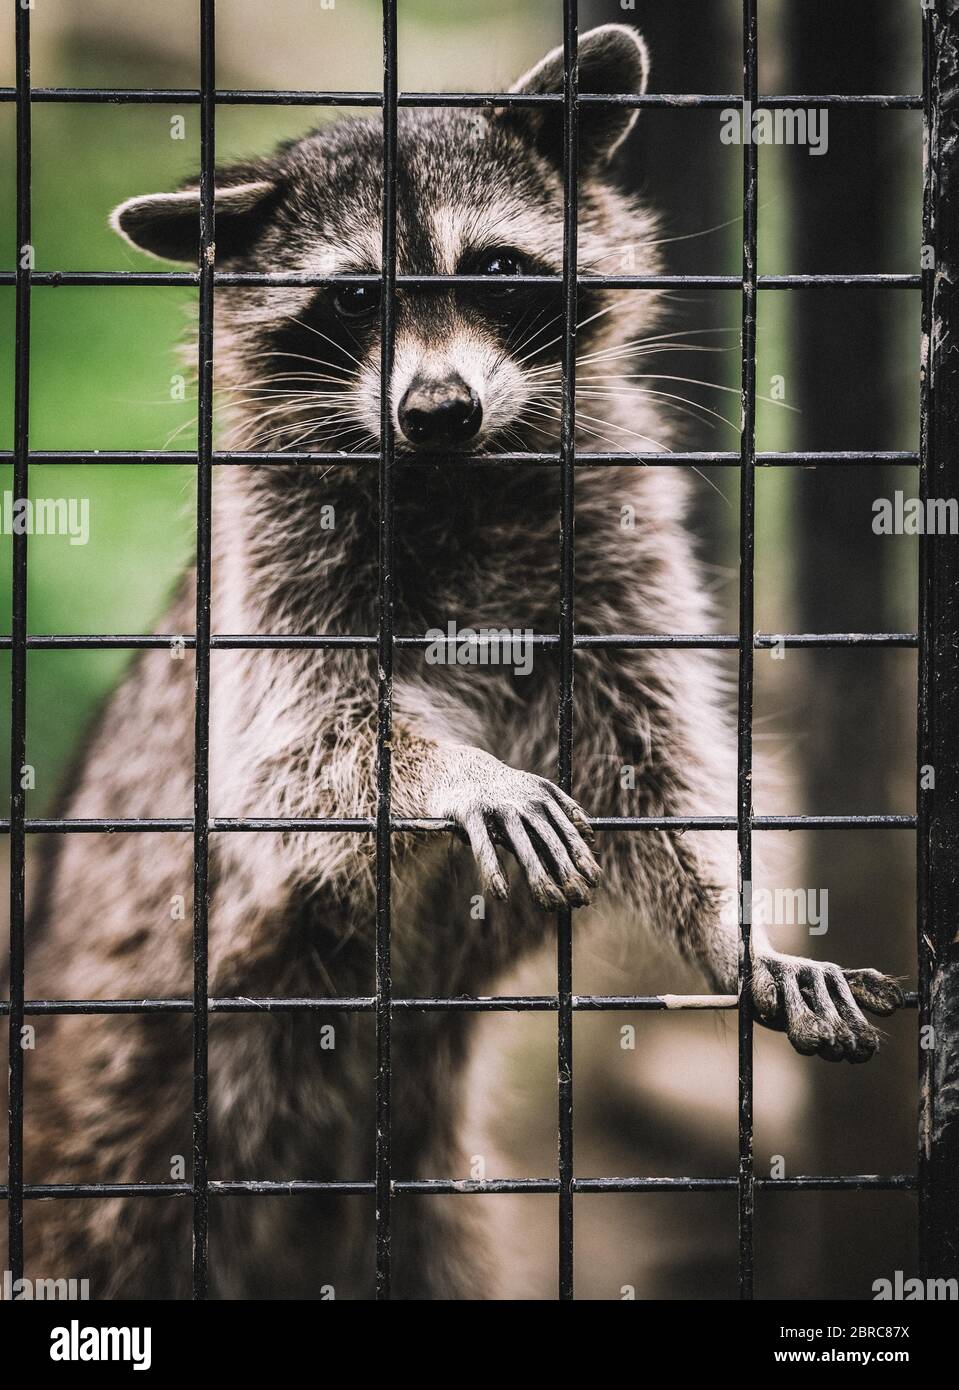 Murazzano, Italy. 20th May, 2020. A raccoon is seen at Langhe safari park in Murazzano, Italy, May 20, 2020. The Langhe safari park has been closed since March due to the COVID-19 pandemic. In order to continue feeding and taking care of the animals, the park has to seek help from restaurateurs, farmers and shopkeepers to donate food to feed the animals. Credit: Federico Tardito/Xinhua/Alamy Live News Stock Photo